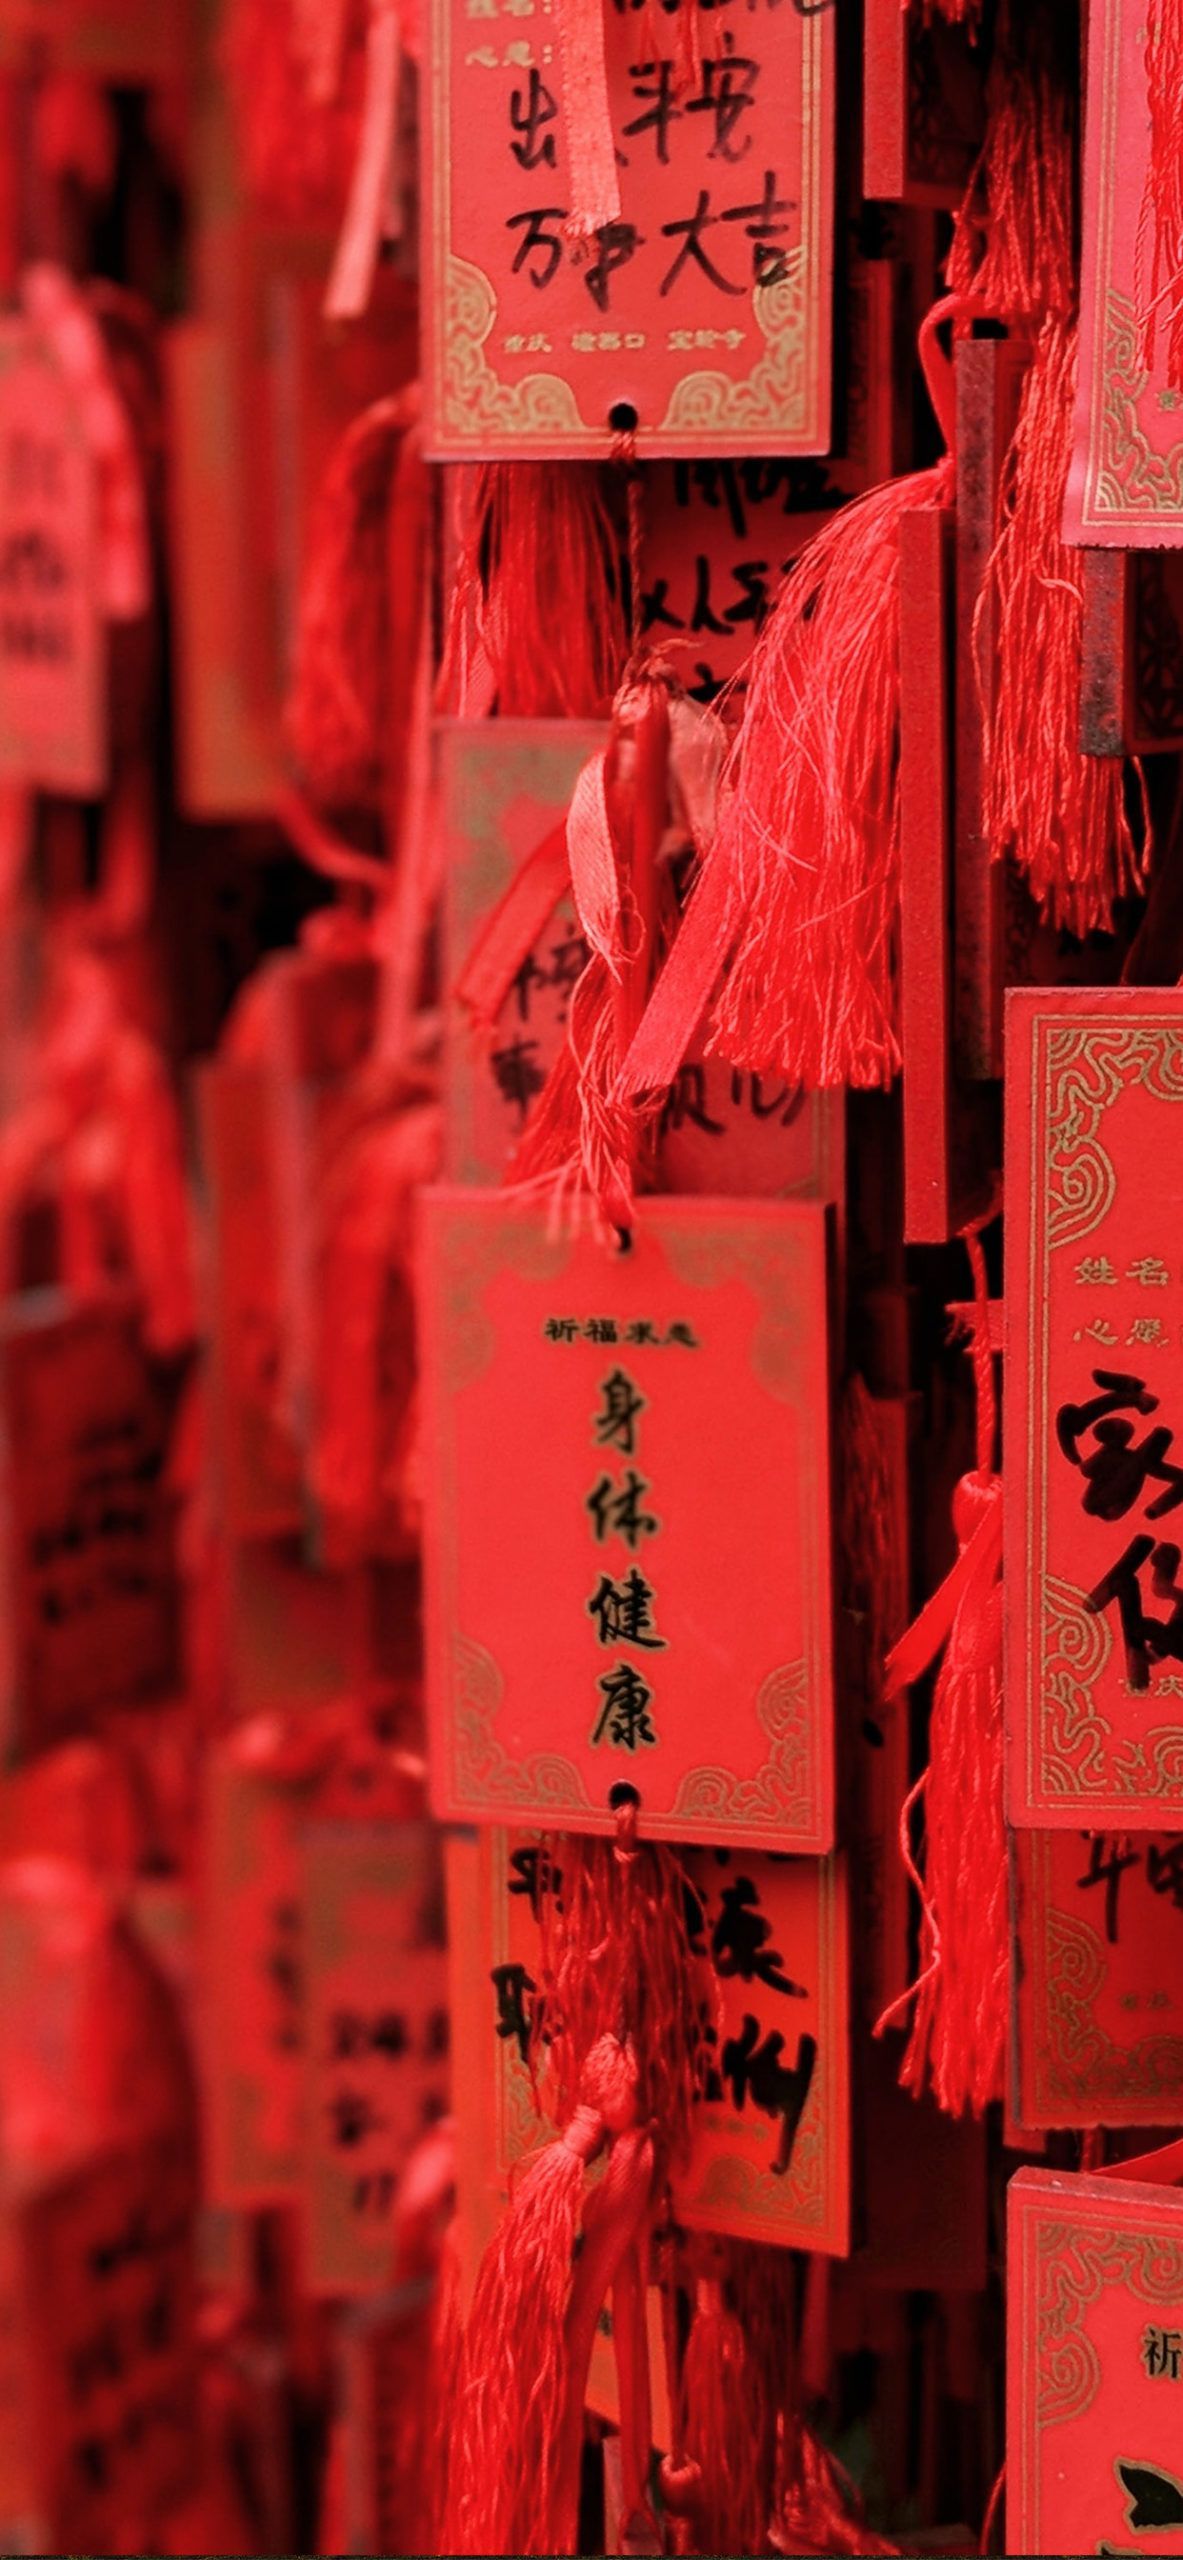 Red tags with wishes written on them. - Chinese